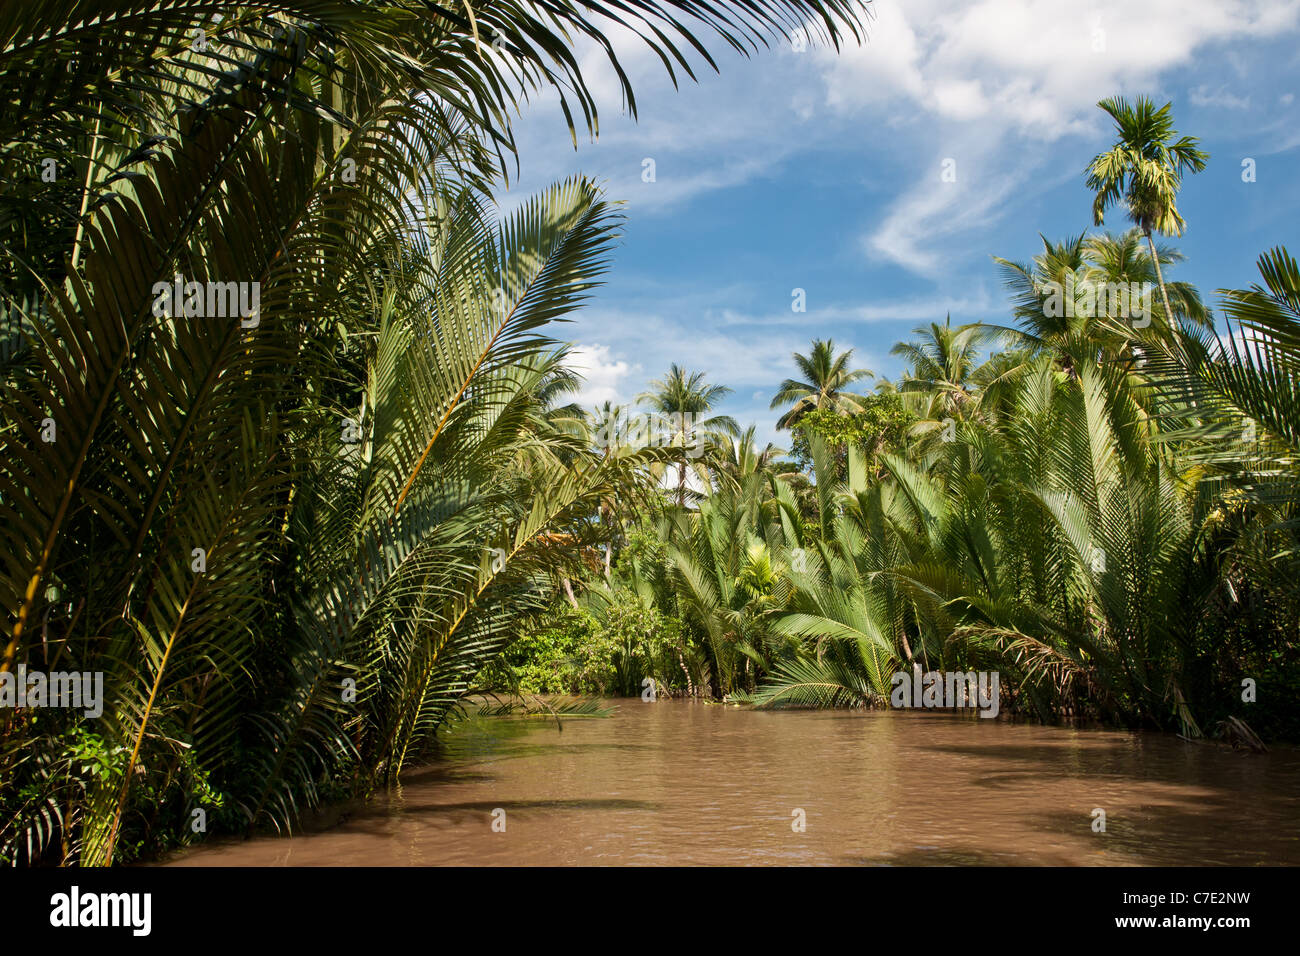 Palm trees rising over desolated canal on Mekong delta, Vietnam Stock Photo